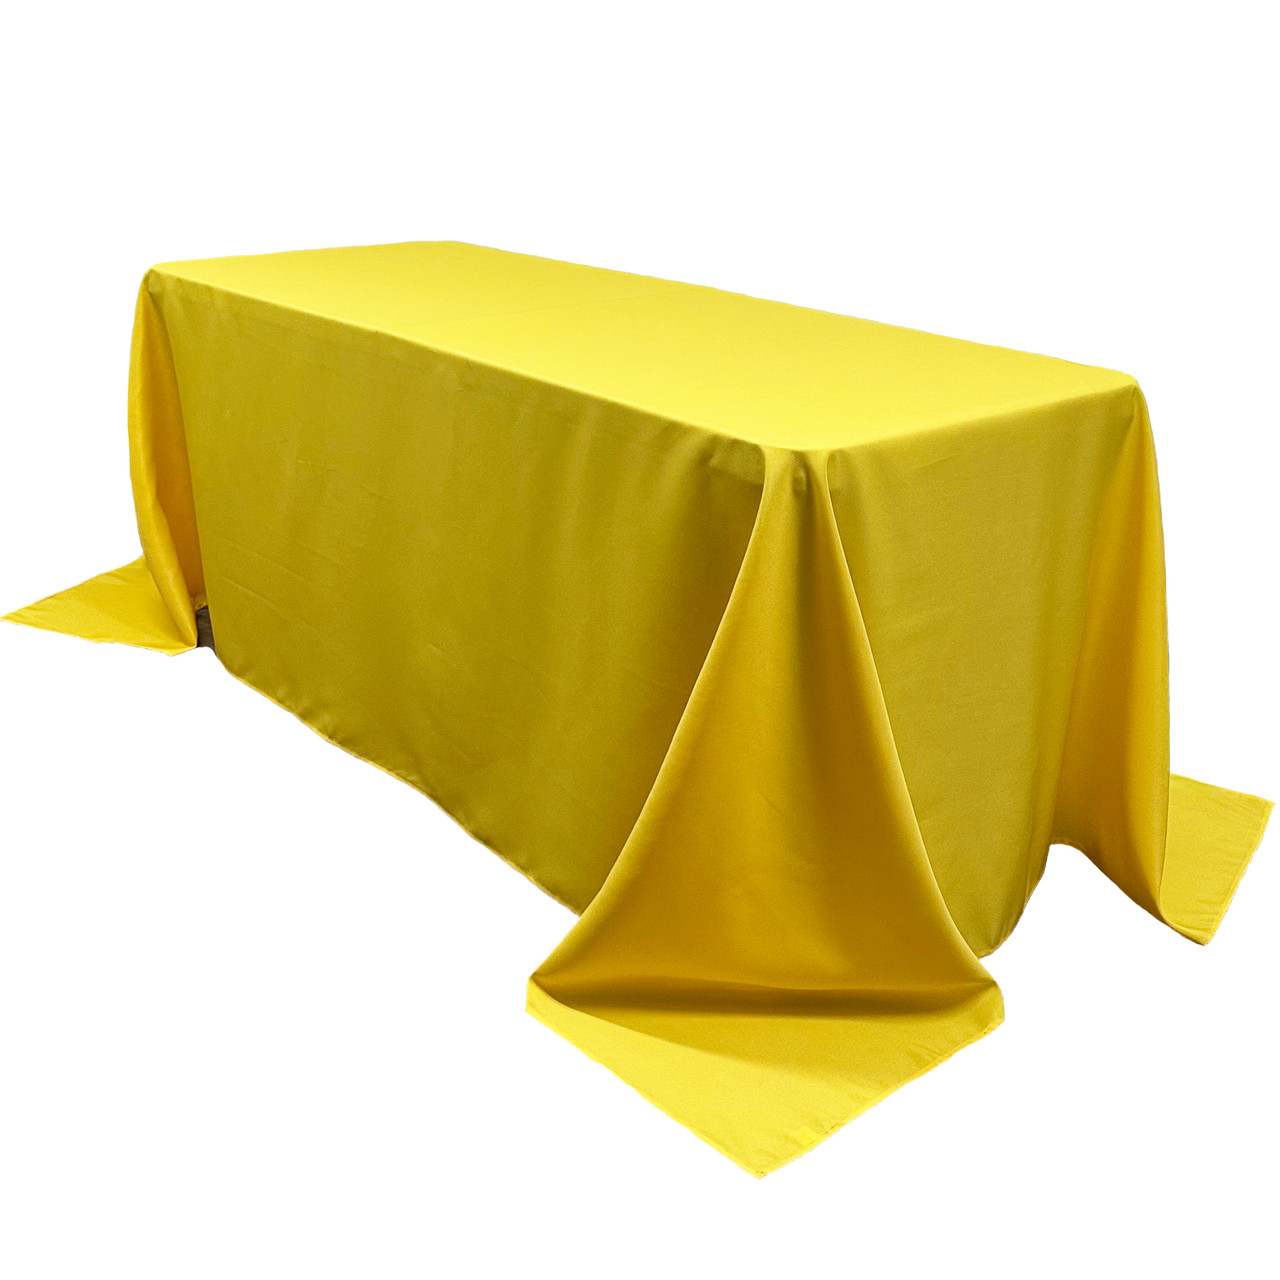 https://cdn11.bigcommerce.com/s-bch7e9/images/stencil/1280x1280/products/2243/16293/90-x-132-inch-rectangular-polyester-tablecloth-canary-yellow__86756.1673646009.jpg?c=2